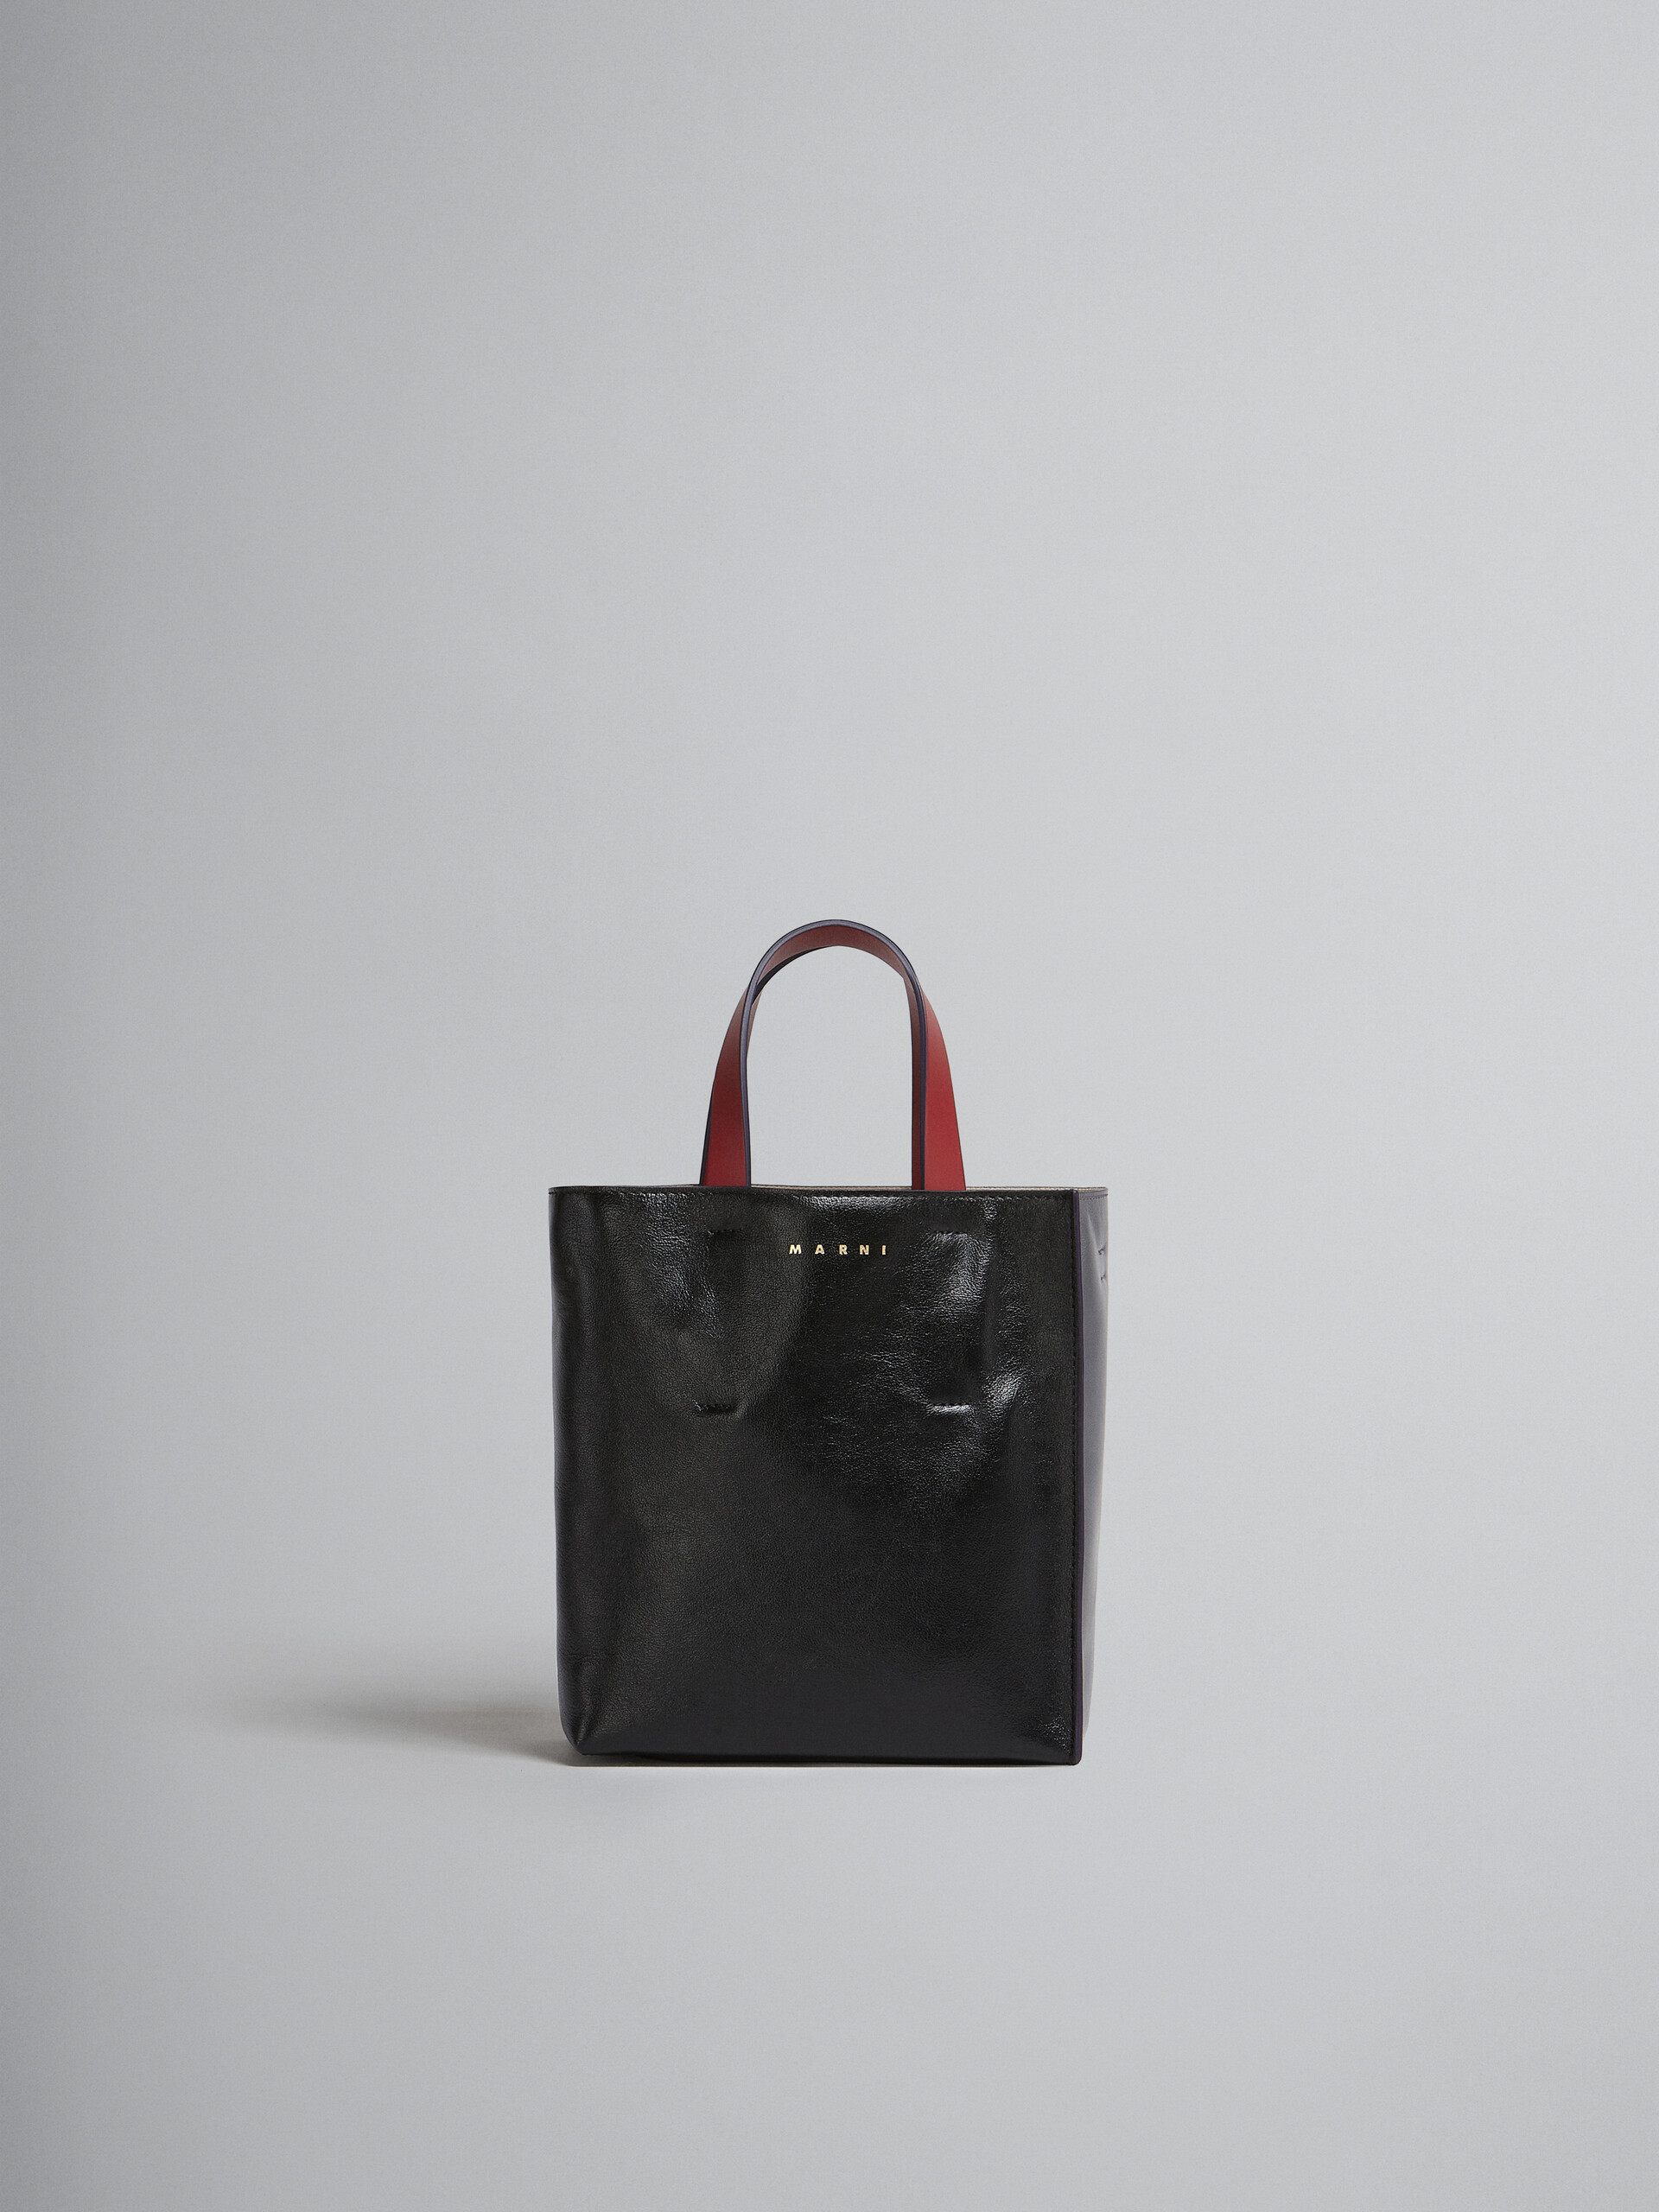 Museo Soft Mini Bag in grey black and red leather